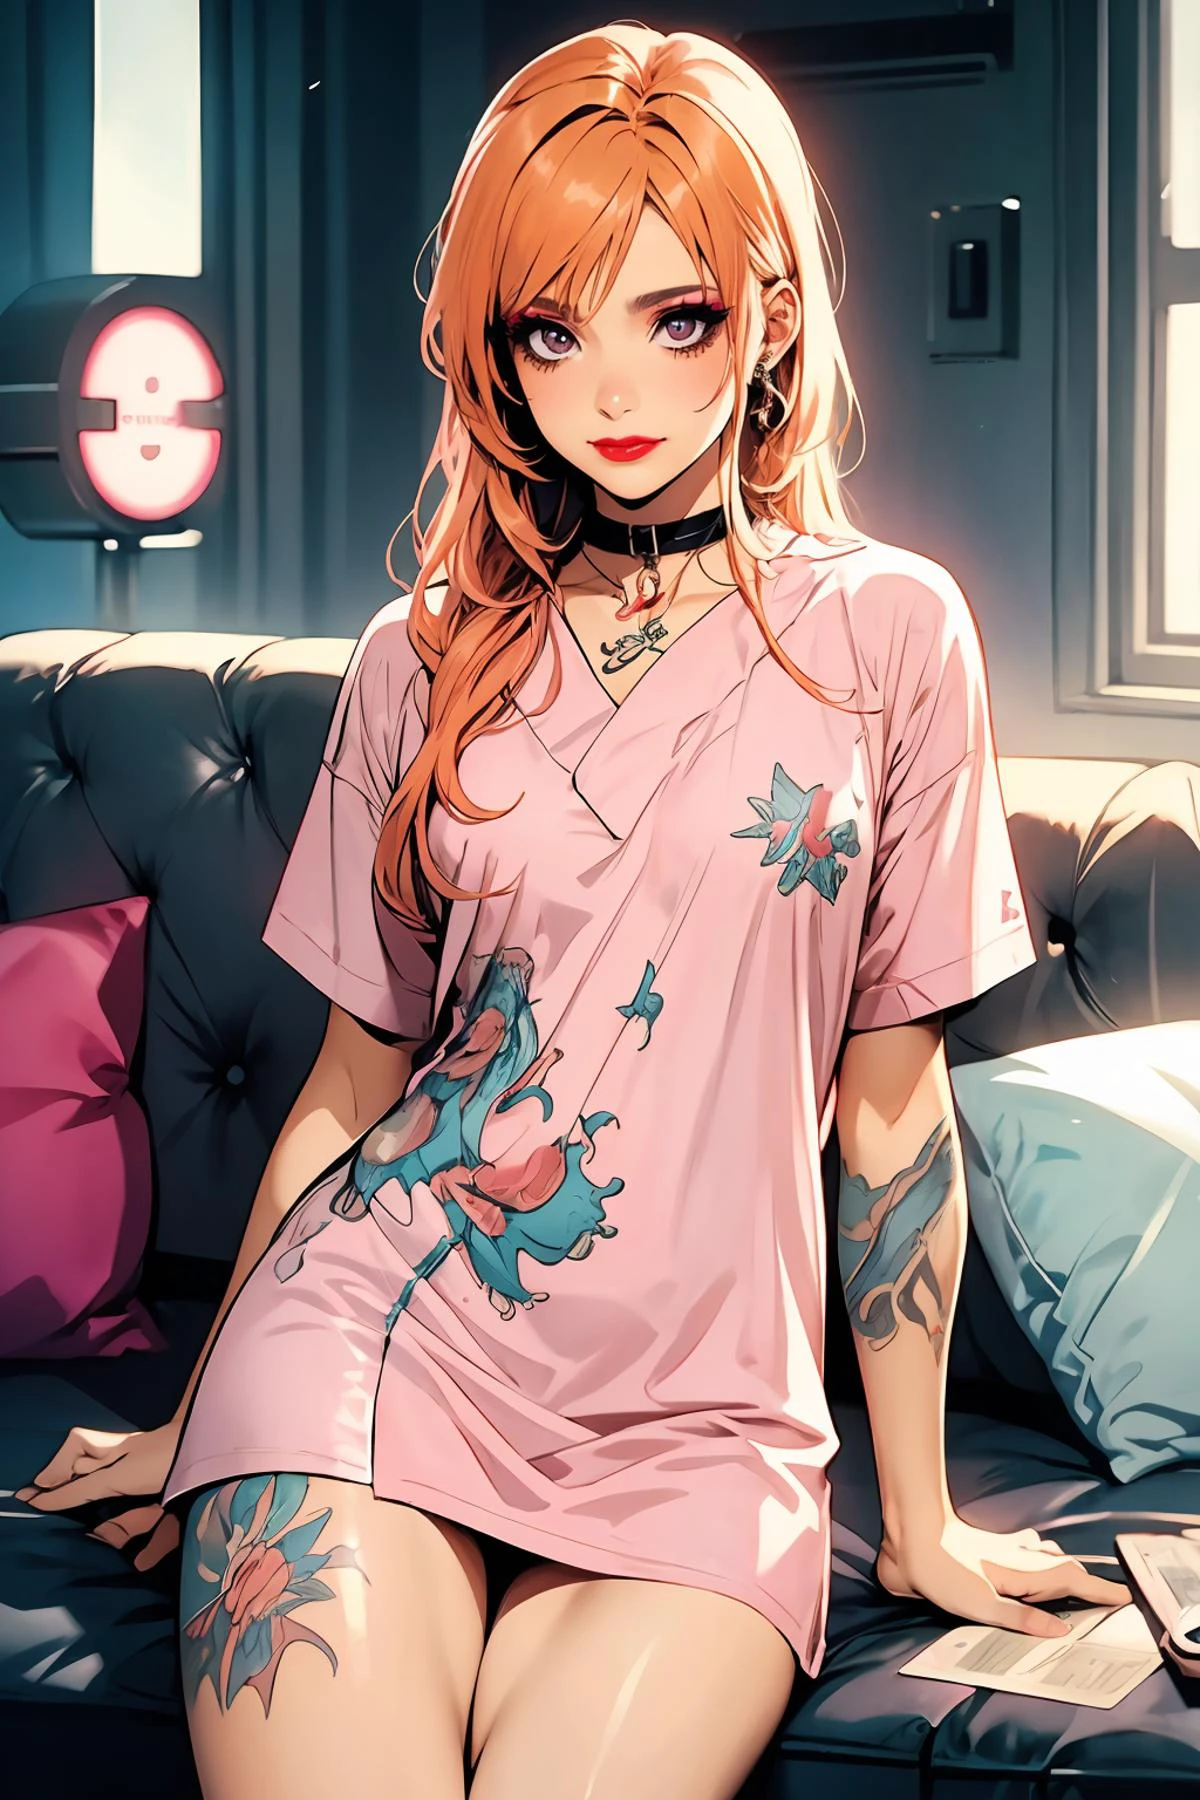 8k high quality detailed,highres,anime,comic,detailed image,
(an illustration of a teenage girl posing,(an illustration of girl,teenage girl)),(magazine_illustration),
(1girl,asian_female,orange hair, long hair, swept bangs, pink eyes, muscular female, medium breasts,(Wistful Smile):0.85),(, m3t0,makeup,eyeshadow,red lipstick,tattoo),detailed_face,
((lying on back, parallel to the camera):0.8),
((, hospital gown,v-collar):0.85),(,realistic clothing texture,realistic_skin_texture),